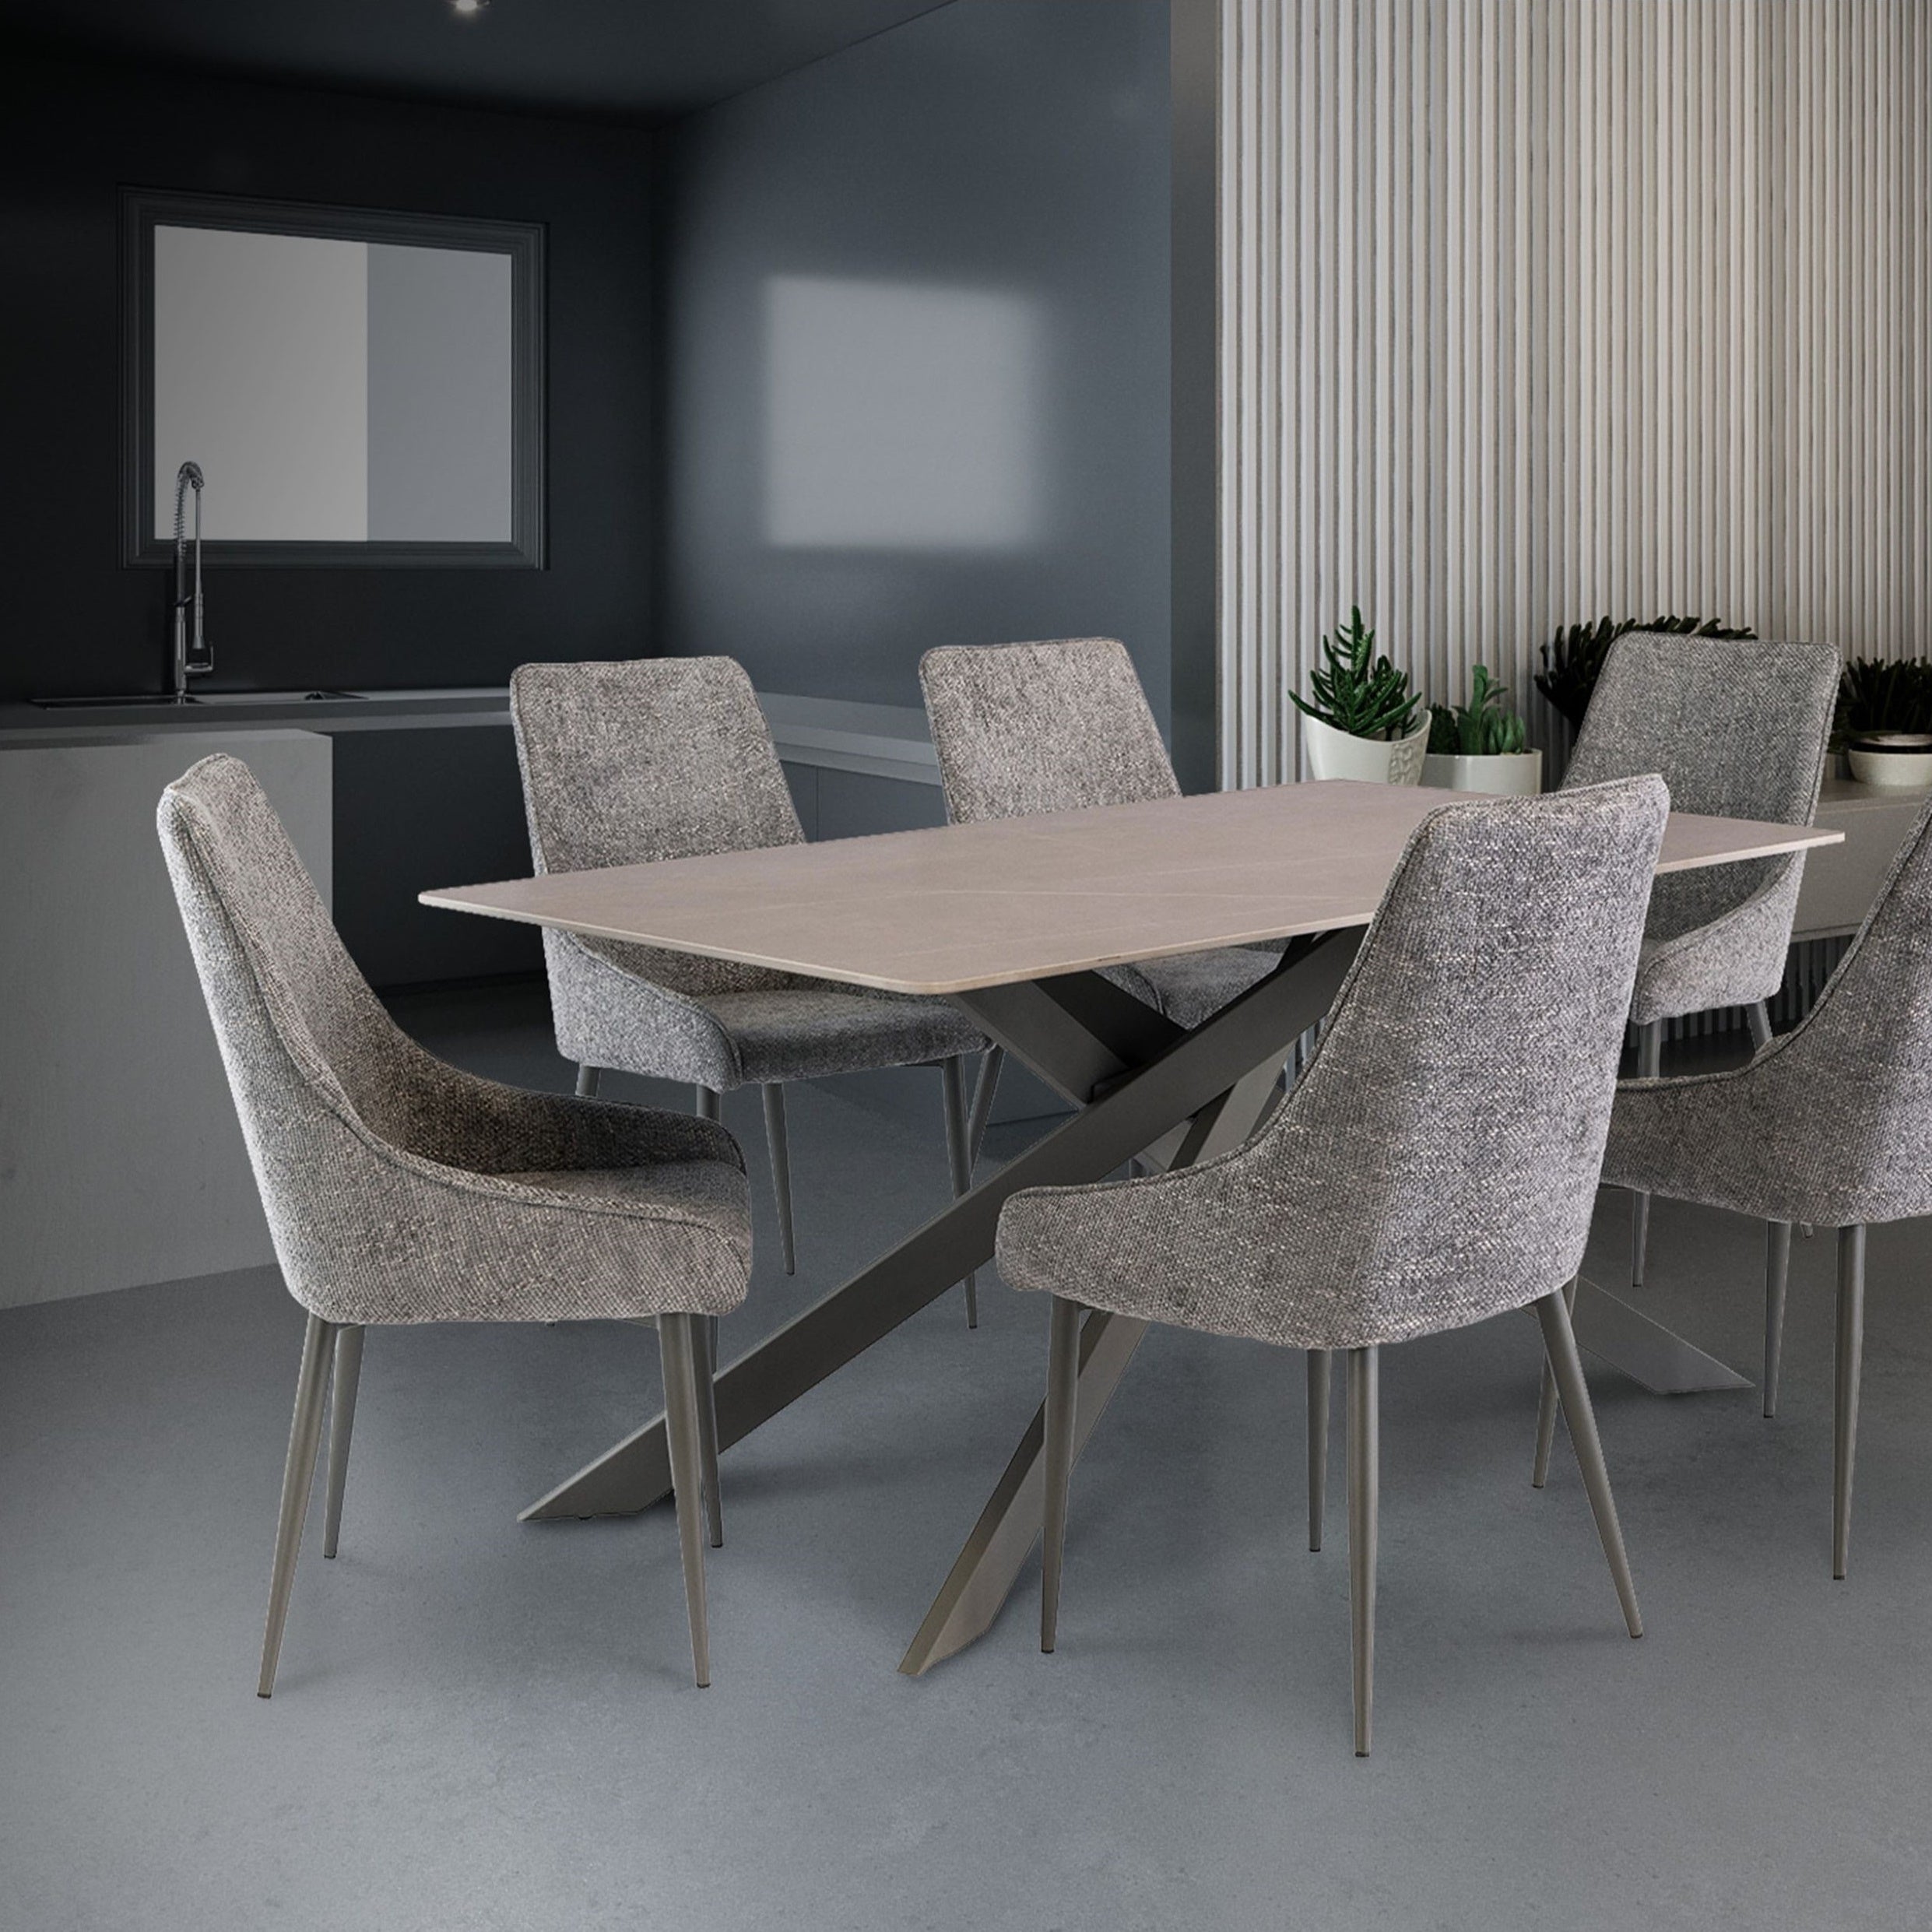 Camilla 6 Seater Dining Table Sintered Stone Grey